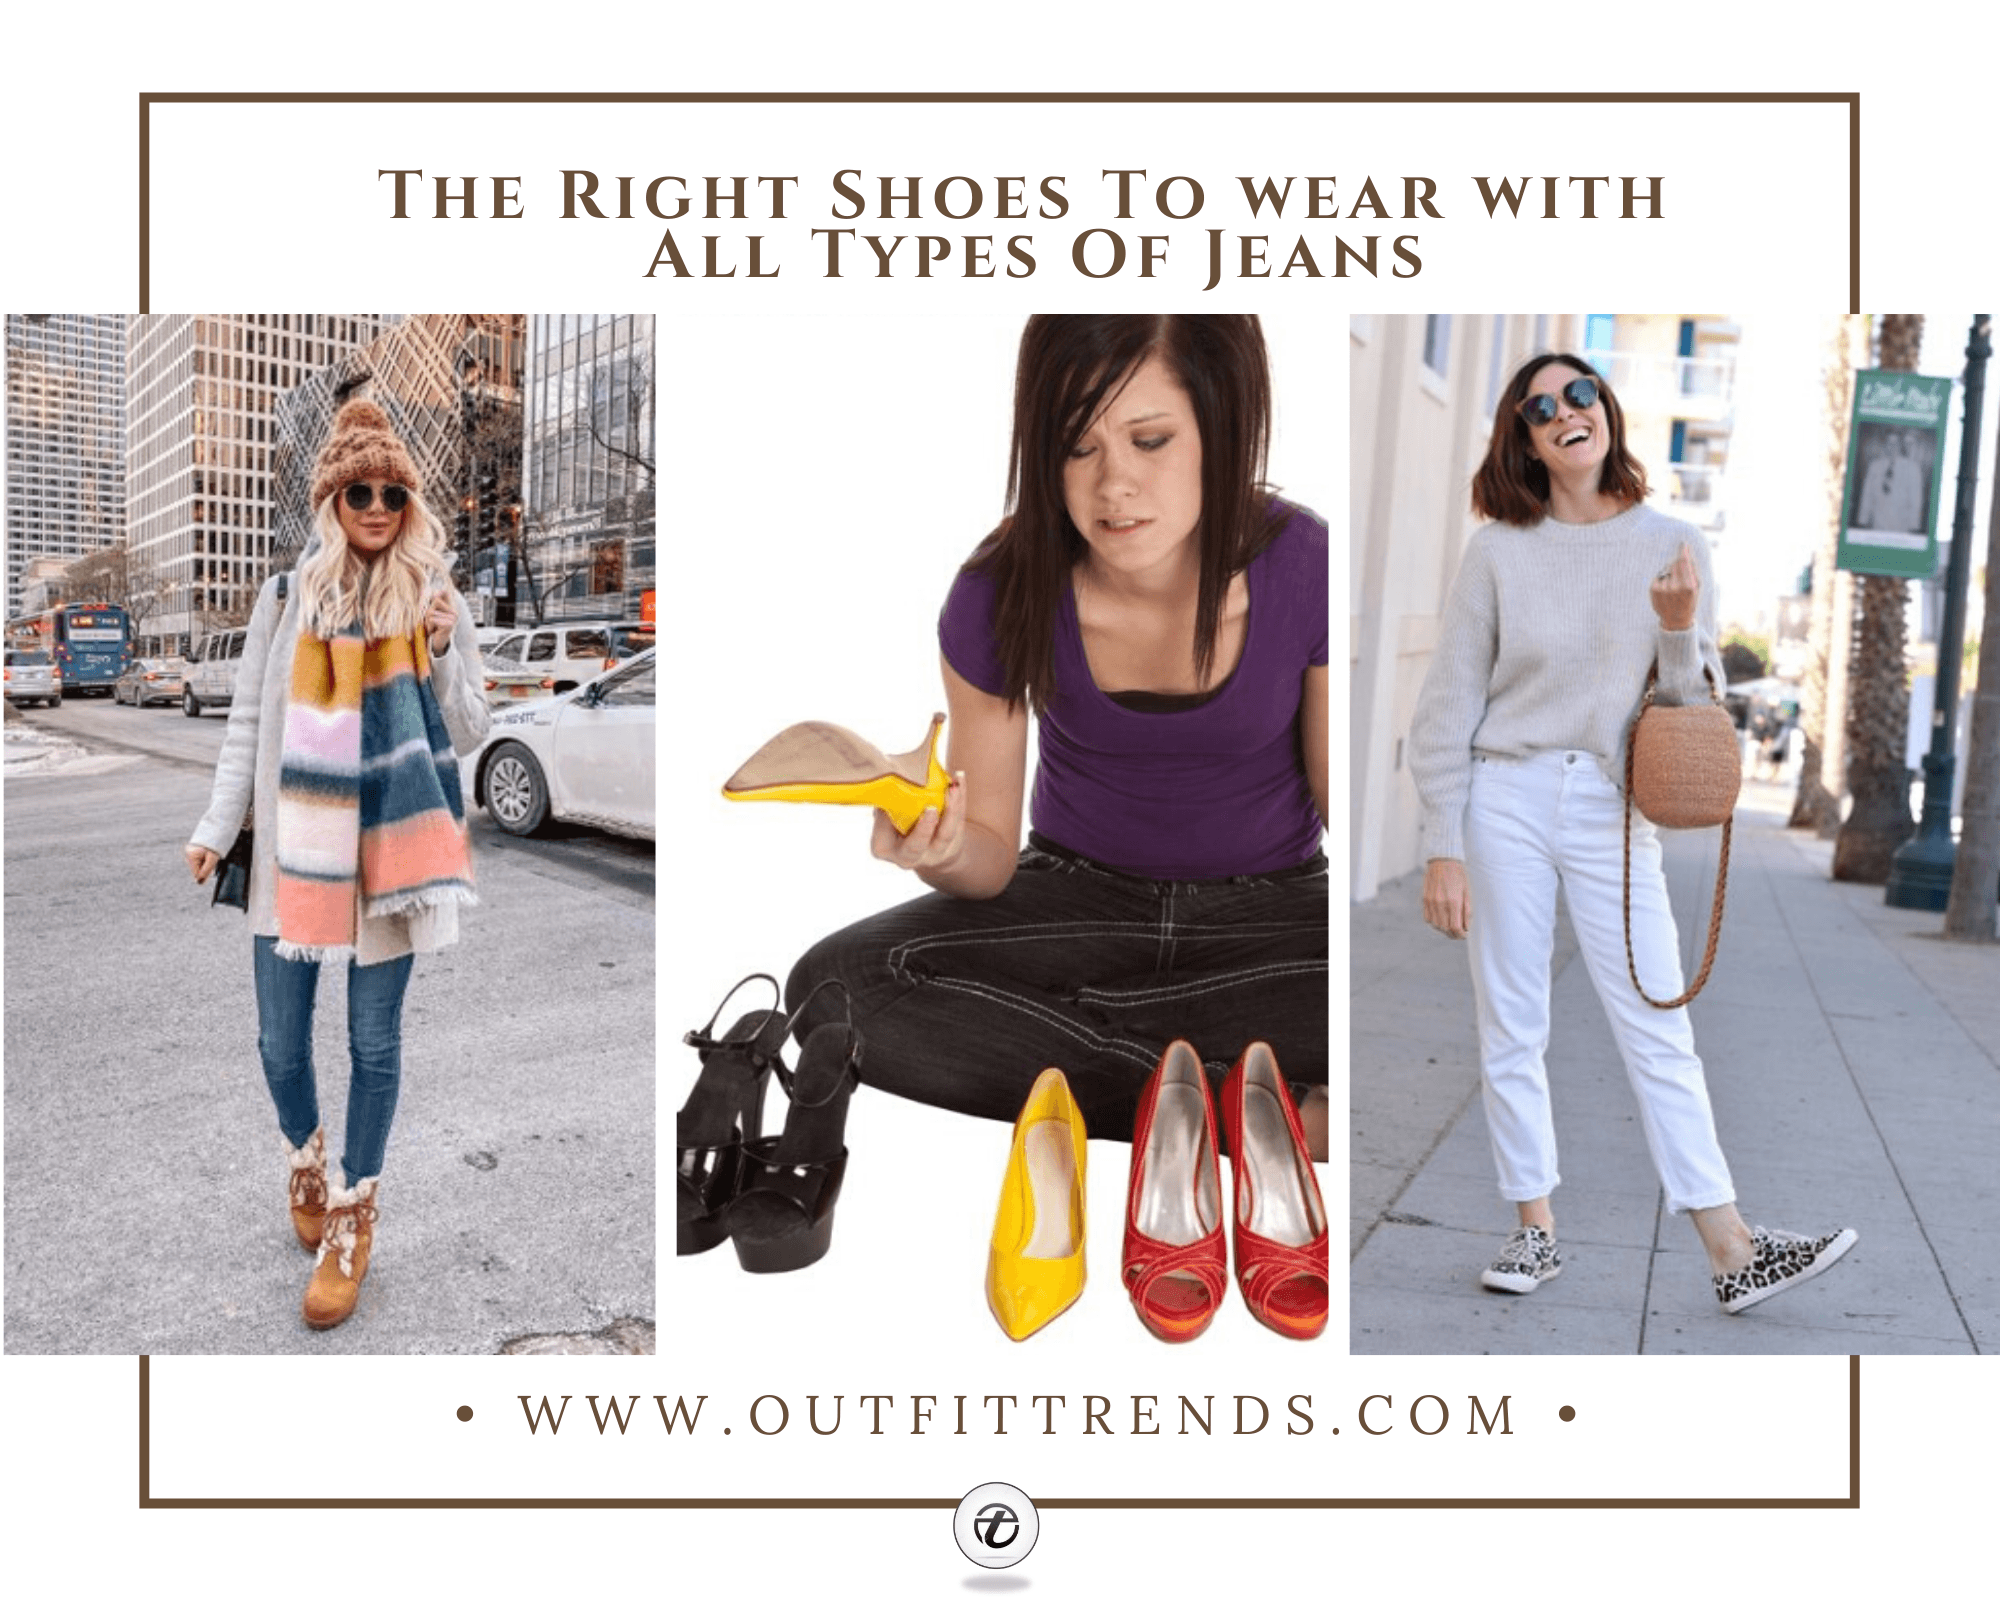 Shoes with Jeans – 31 Shoes To Wear With All Types Of Jeans